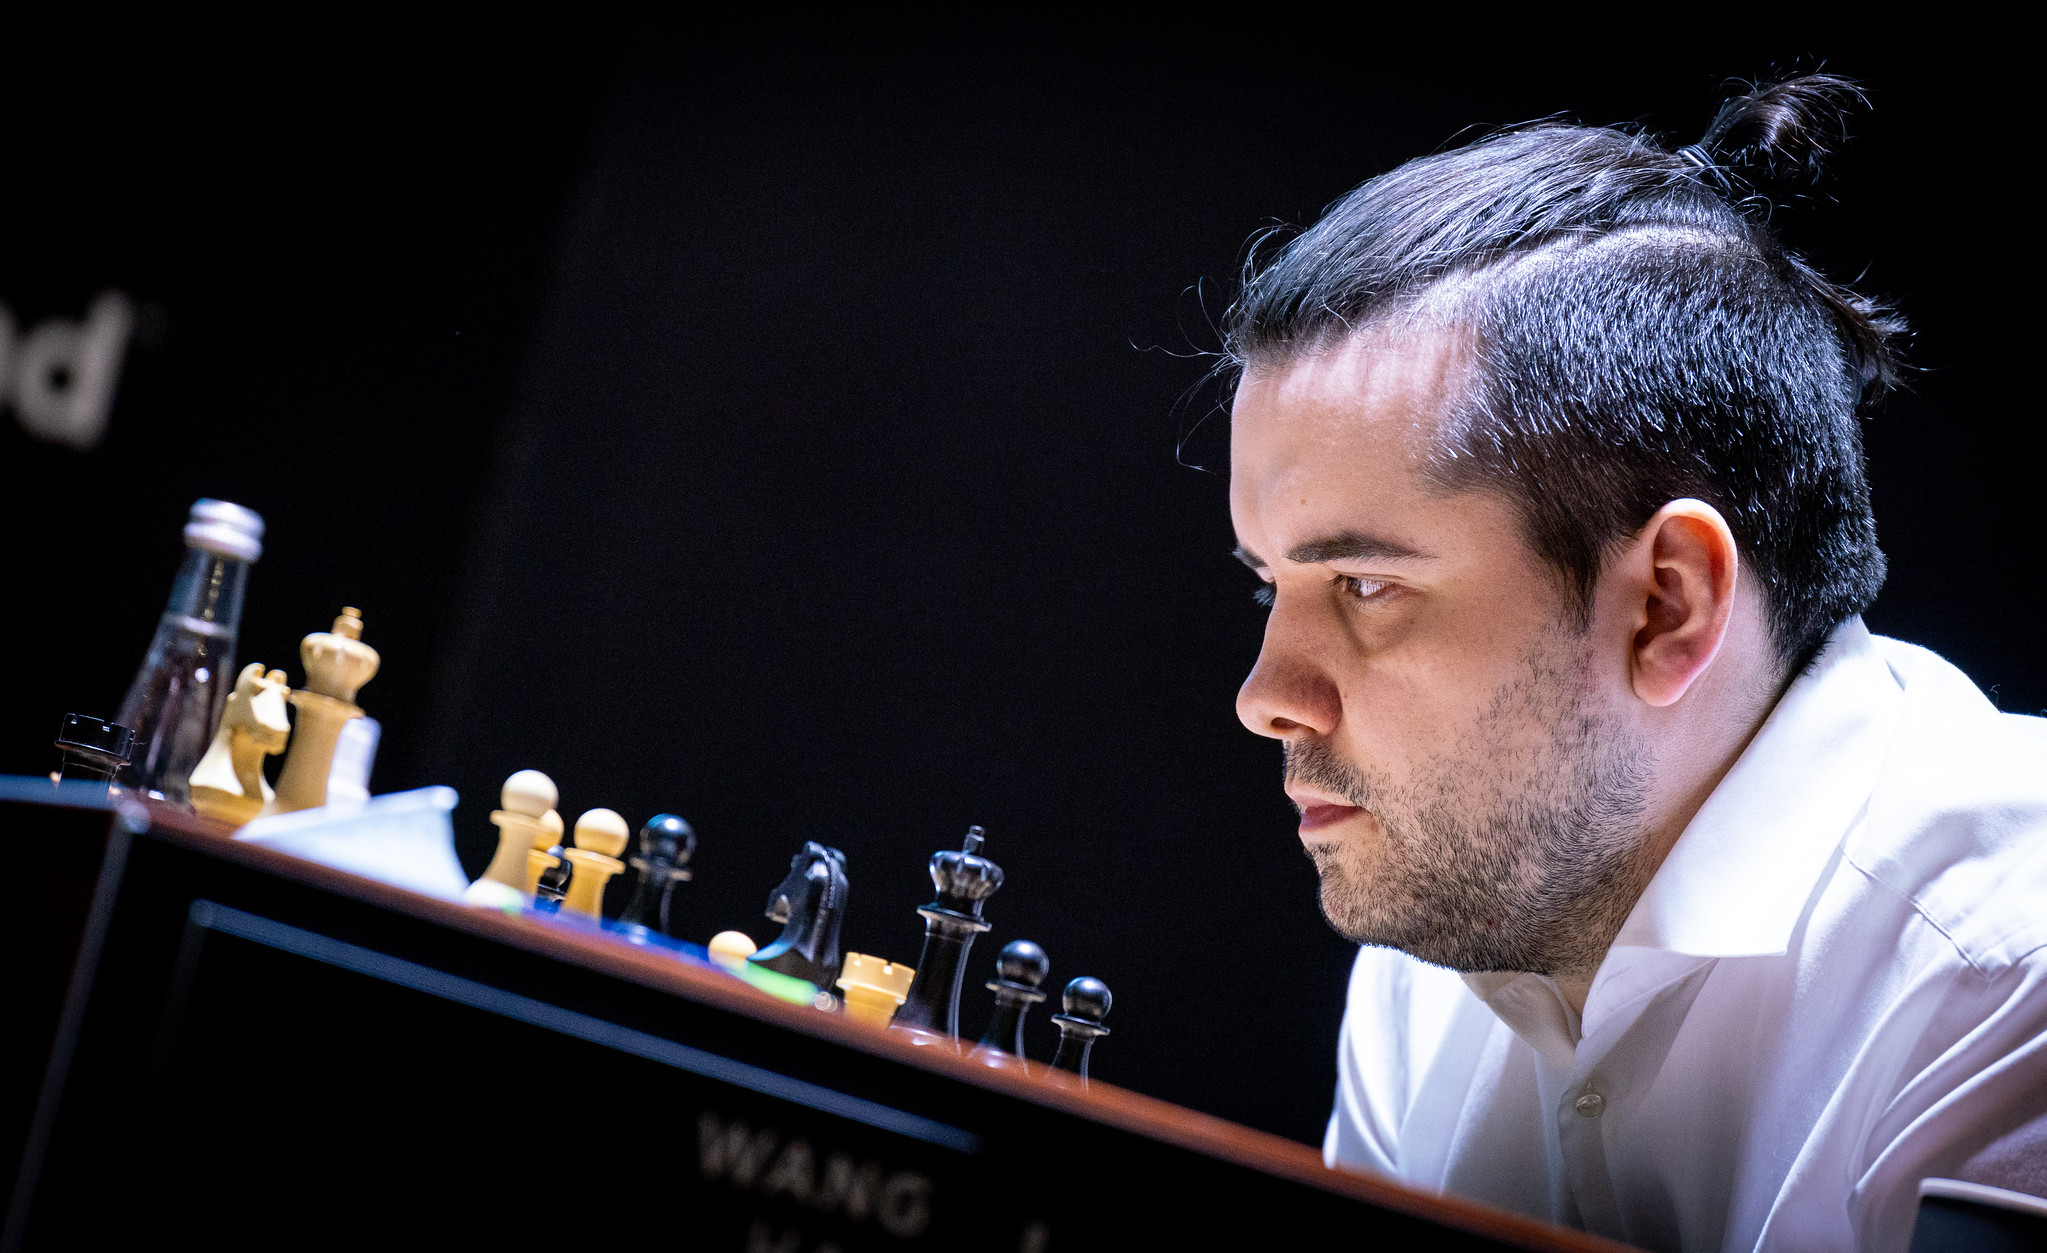 Ian Nepomniachtchi is leading #FIDECandidates after his round 5